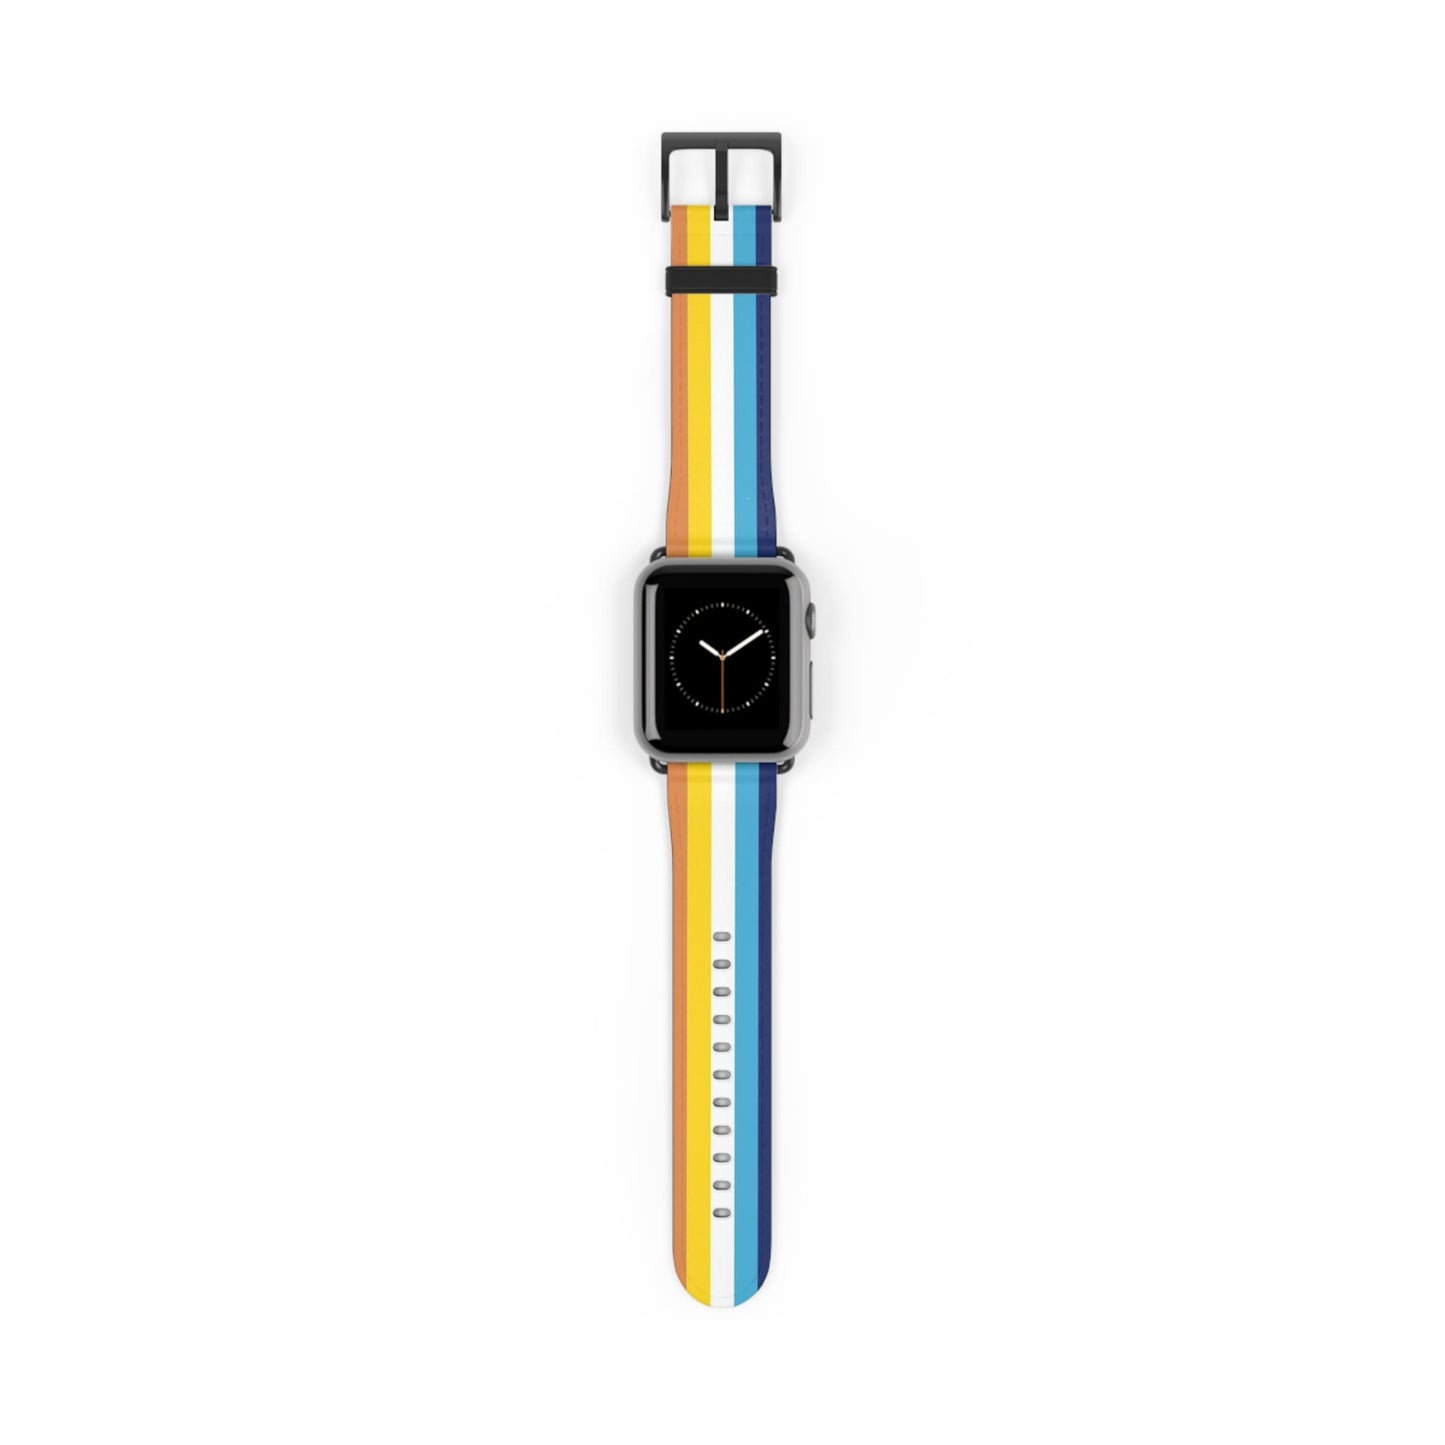 aroace watch band for Apple iwatch, black